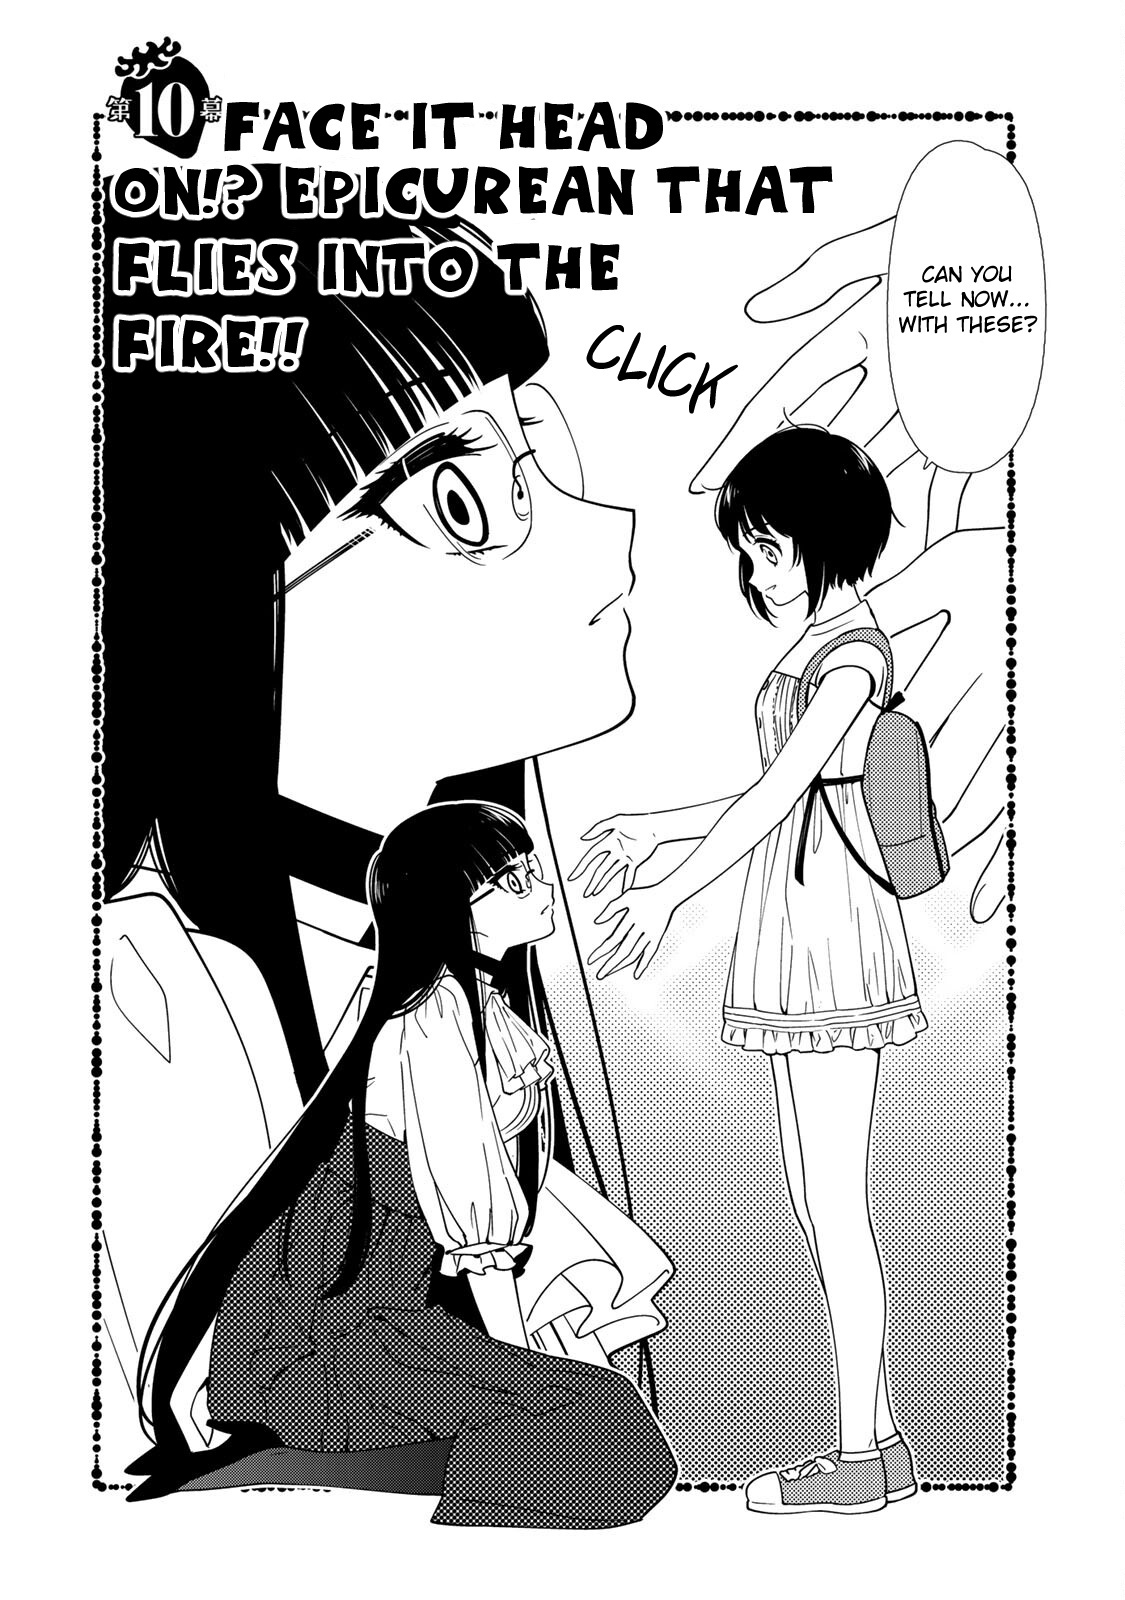 Kamitsuki Gakuen Vol.2 Chapter 10: Face It Head On! Epicurean That Flies Into The Fire!! - Picture 2